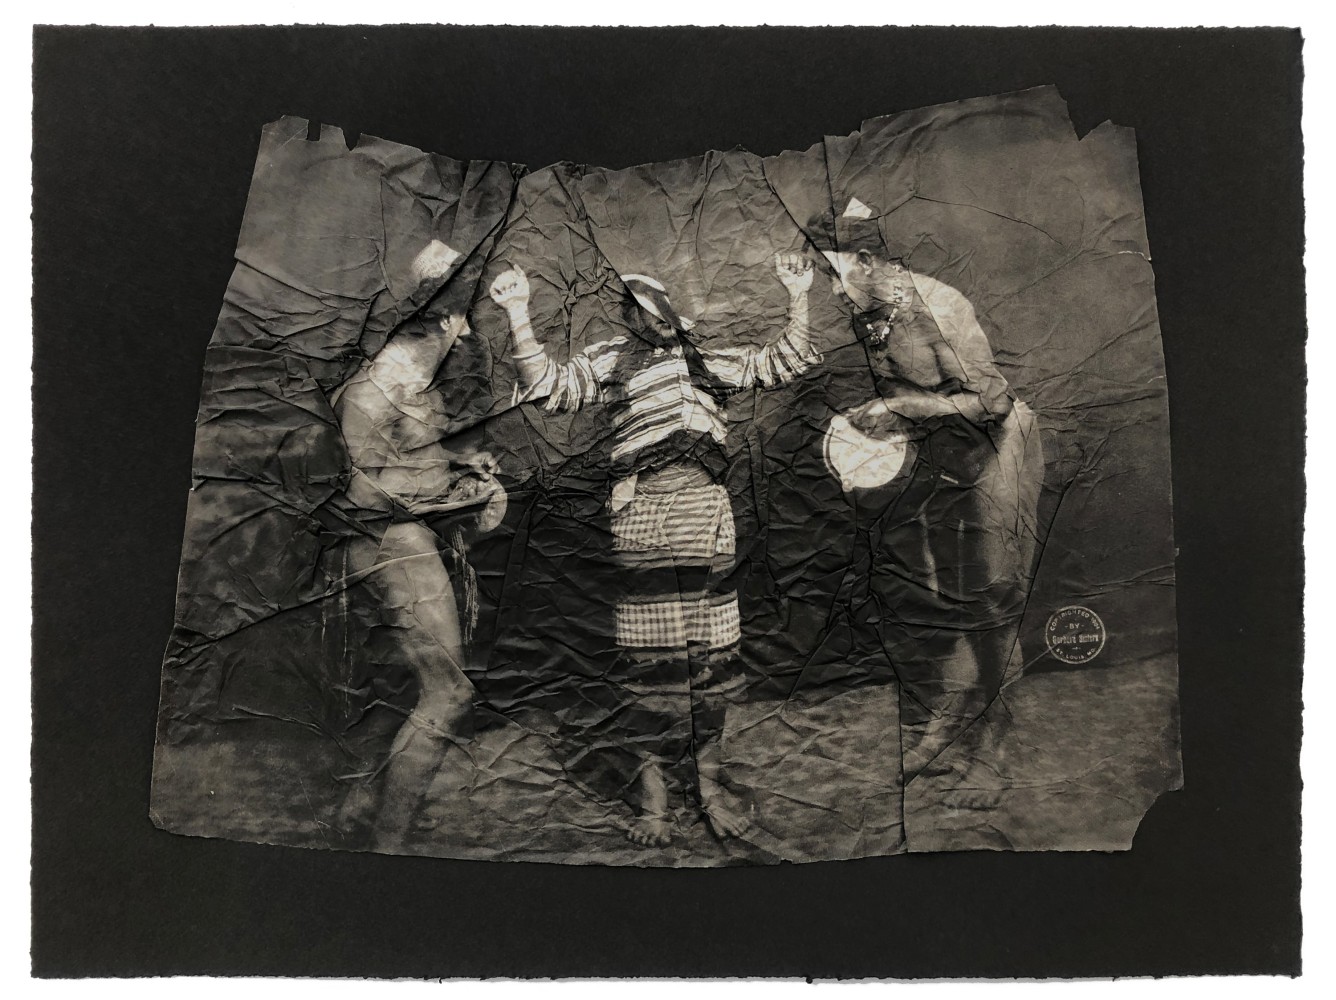 Afterimages (Interference of Vision)
Stephanie Syjuco, 2021

Photogravure printed on gampi mounted on Somerset black 280 gram cotton rag;
Re-edited photograph of an ethnological display of Filipinos from the 1904 St. Louis World&amp;rsquo;s Fair
Image: 16&amp;quot; x 20&amp;quot; ; Sheet: 18&amp;quot; x 24&amp;quot;
Crumpled/folded gampi is proud by 1/8&amp;rdquo; from back mounted layer
Edition of 20 plus 8 proofs
$4500

Printed by Paul Mullowney and Harry Schneider, Co-published by BOXBLUR, Catharine Clark Gallery, and Mullowney Printing, San Francisco, CA and Portland

PURCHASE